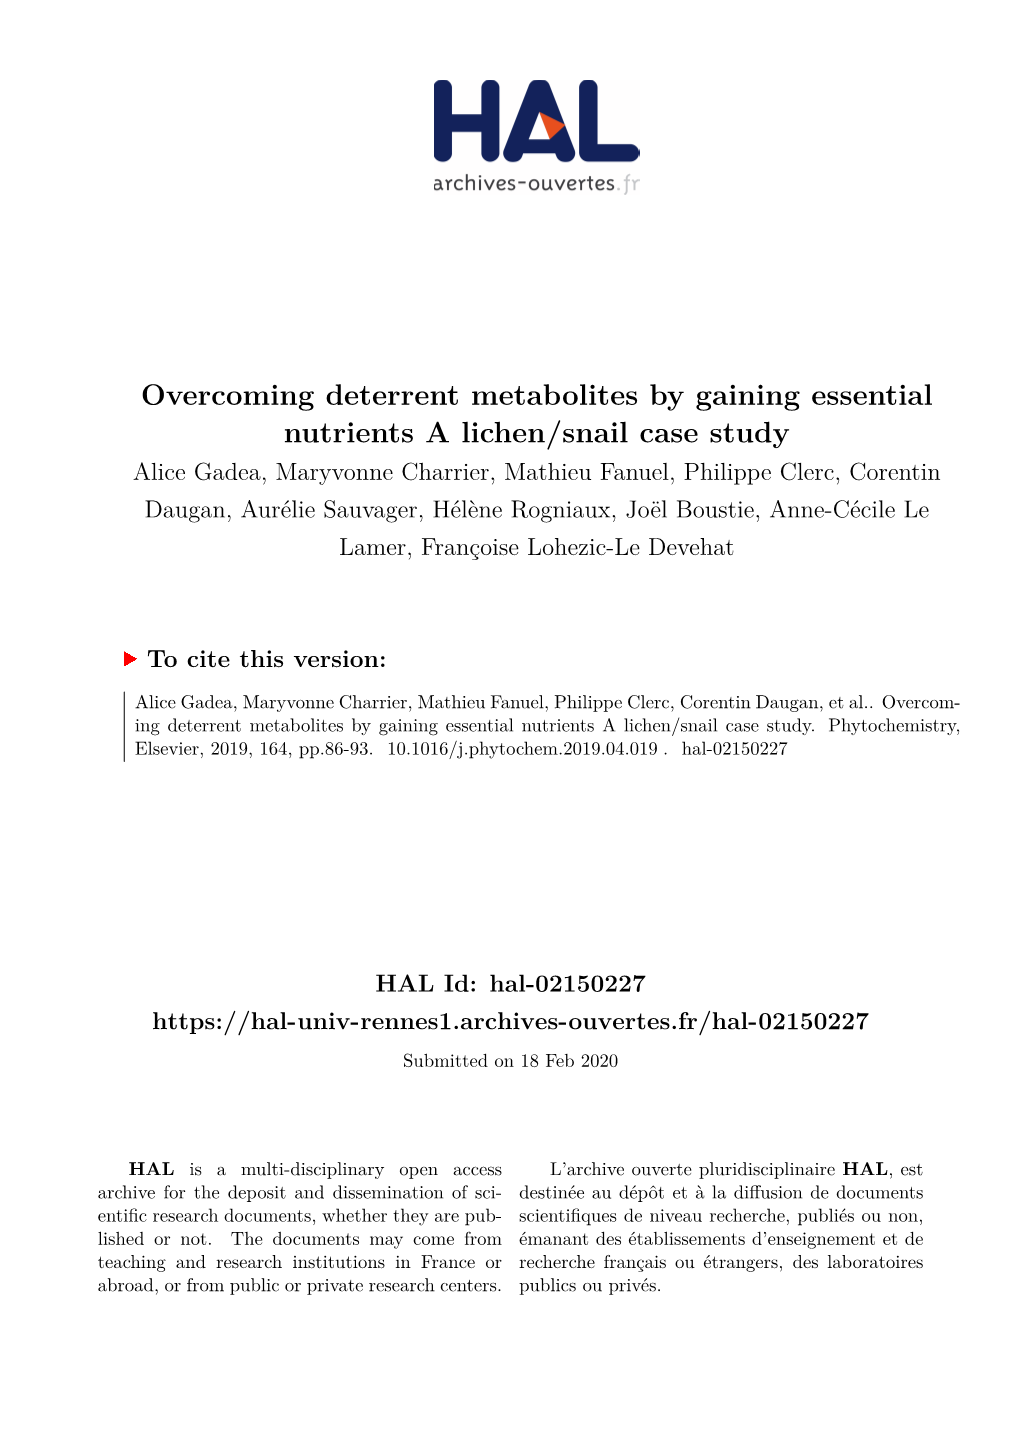 Overcoming Deterrent Metabolites by Gaining Essential Nutrients a Lichen